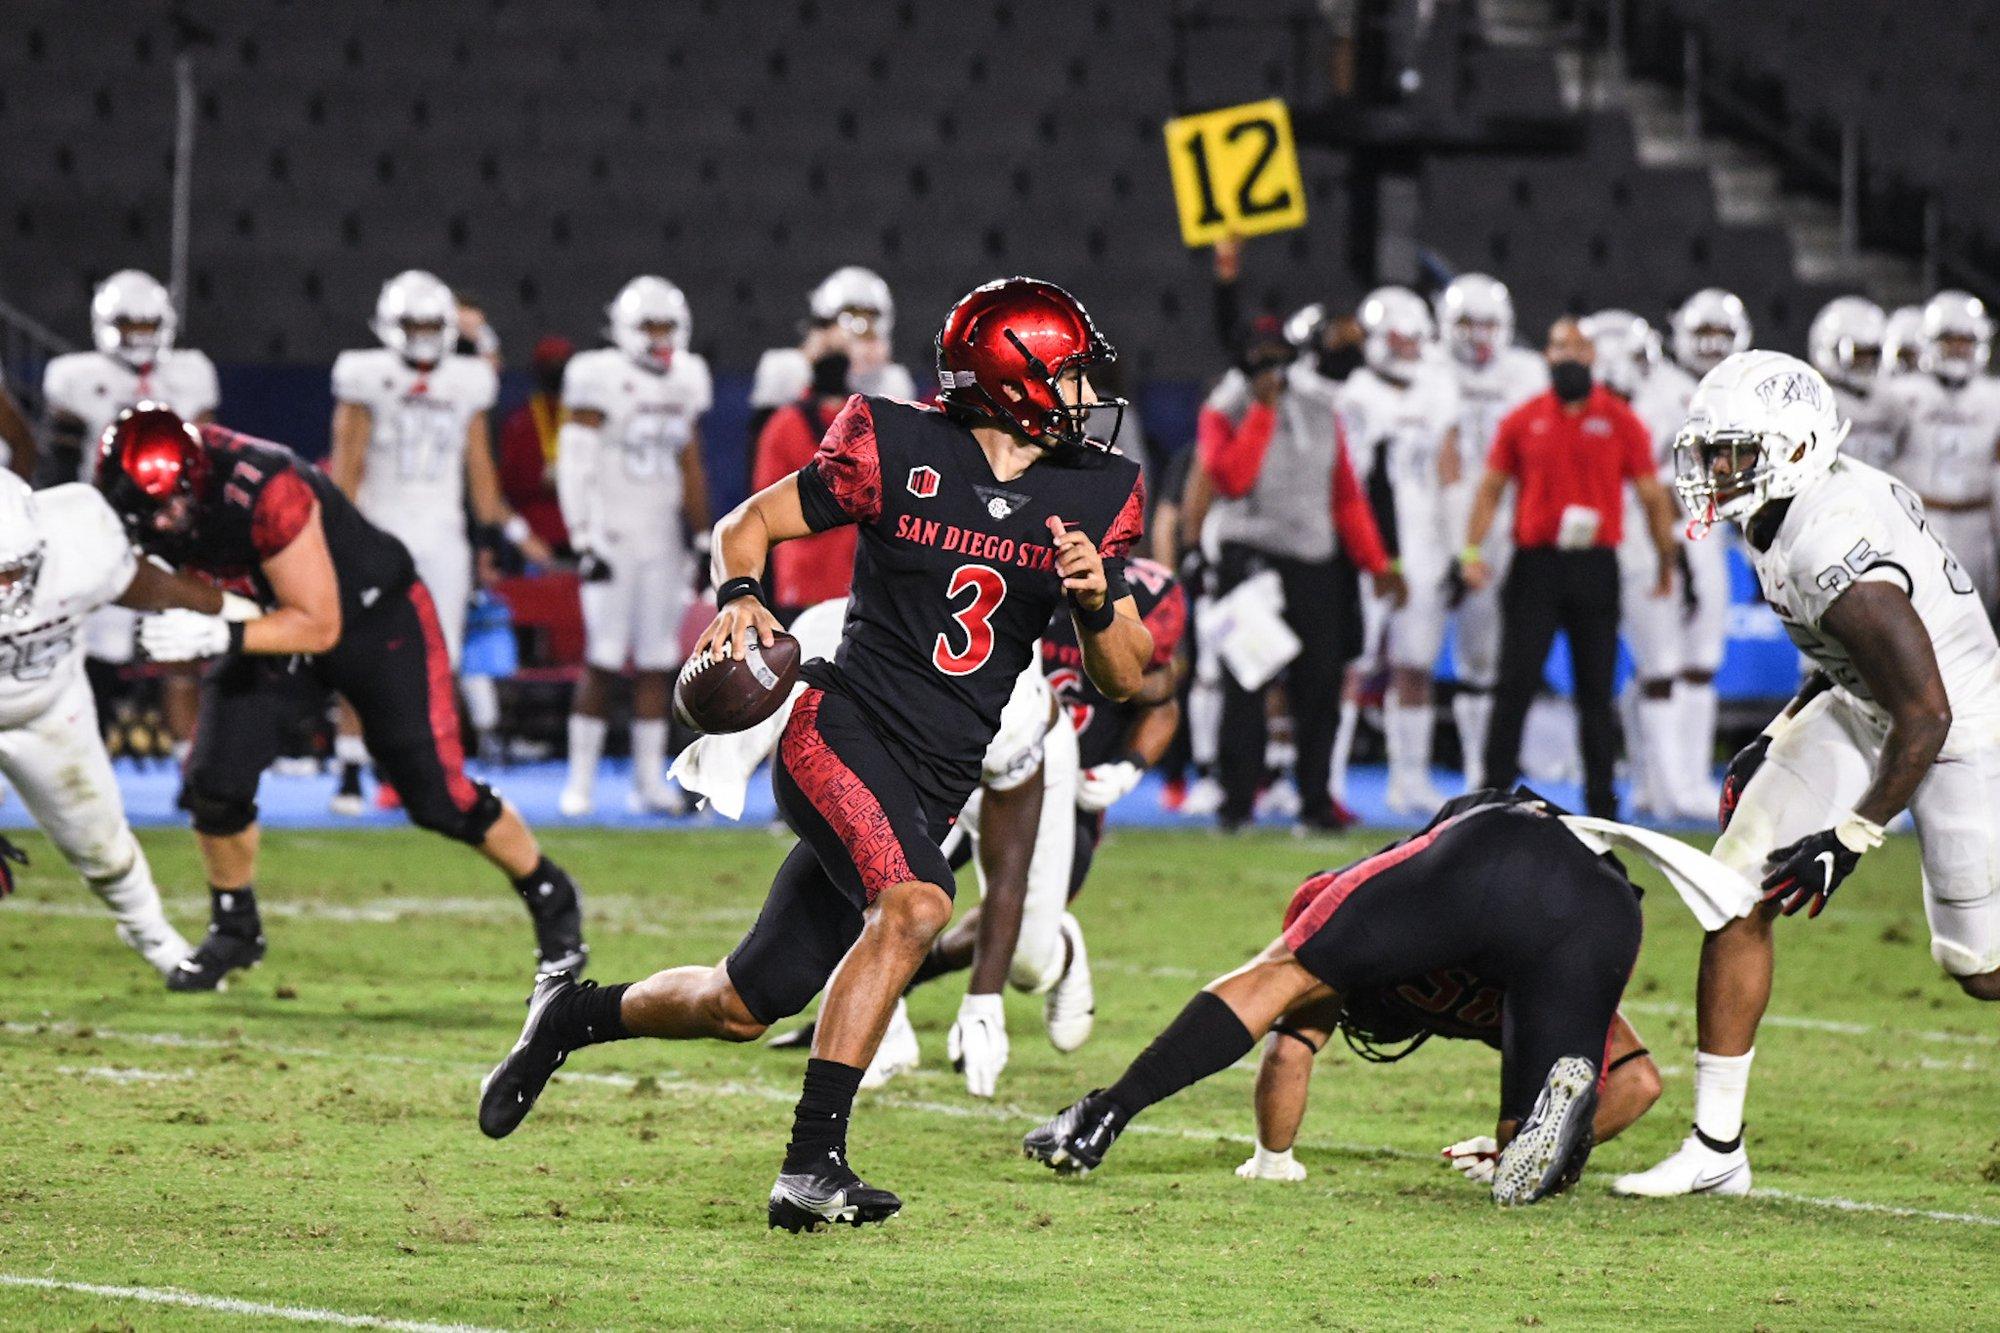 San Diego State Aztecs vs San Jose State Spartans Betting Preview: Unbeaten Aztecs are Road Favorites on Friday Night